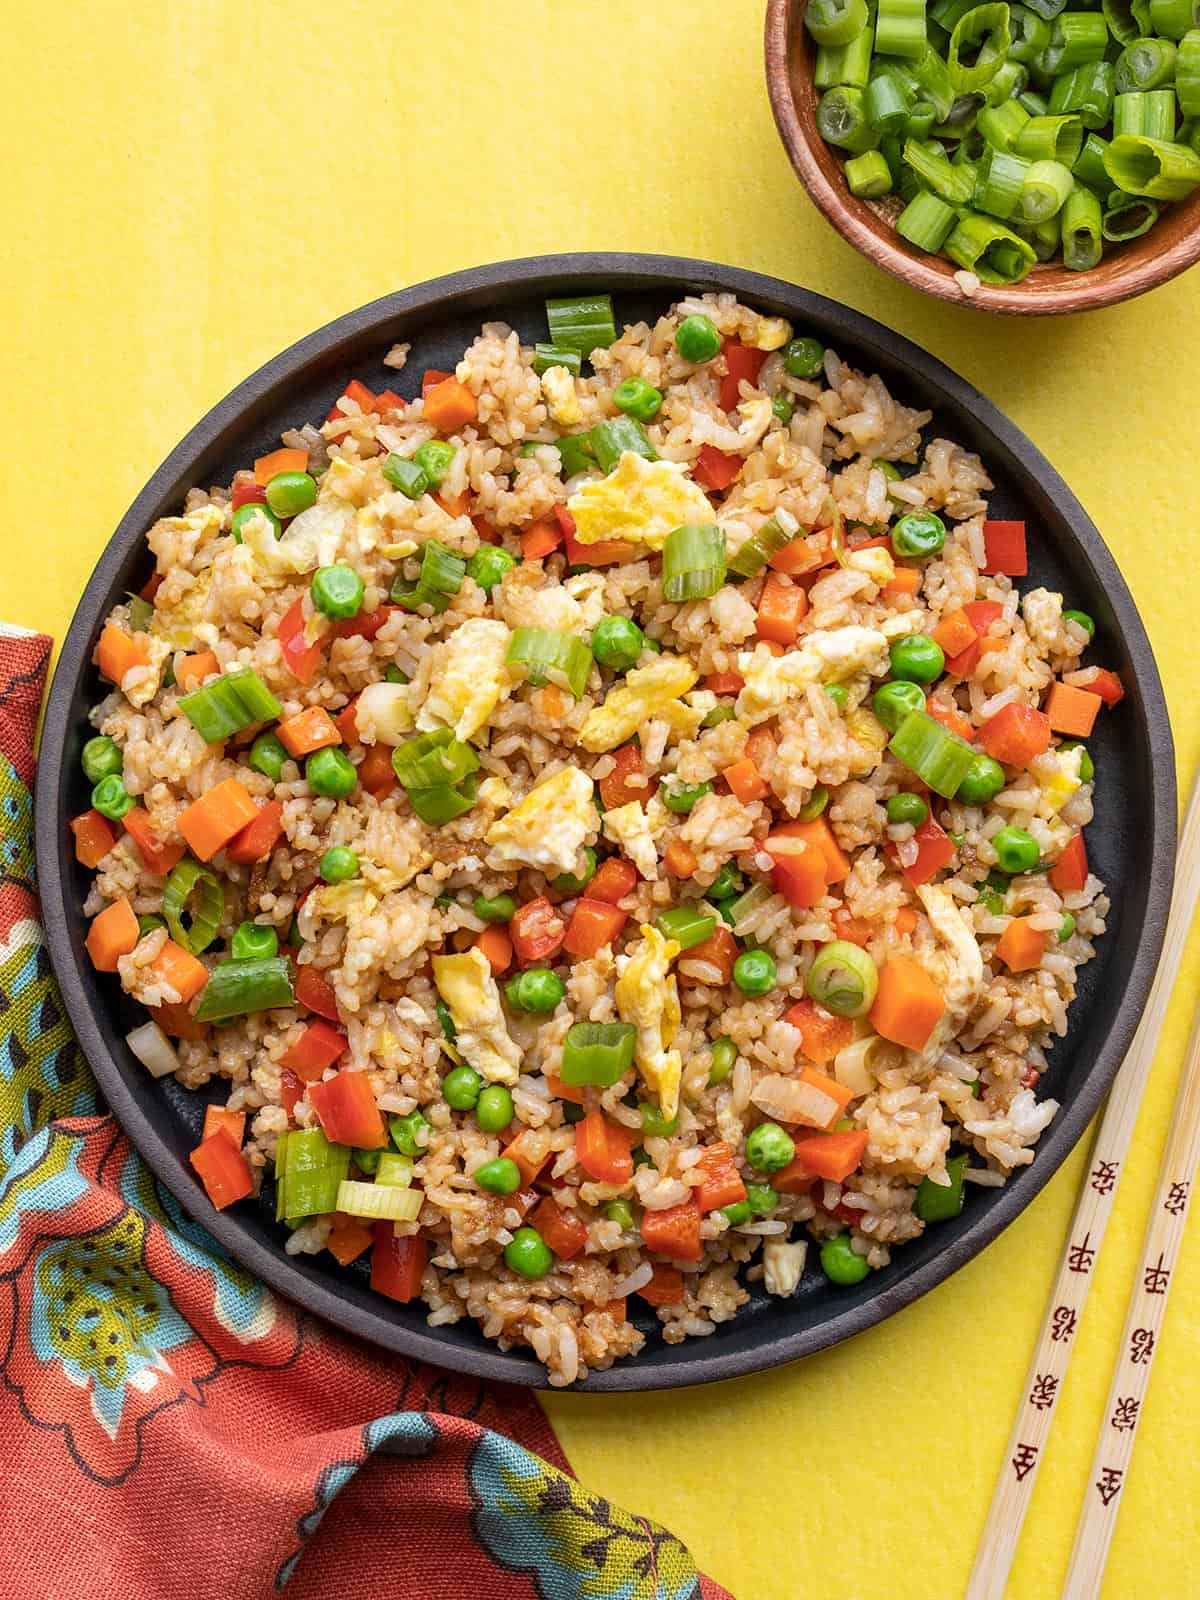 Overhead view of a black plate full of vegetable fried rice on a yellow background